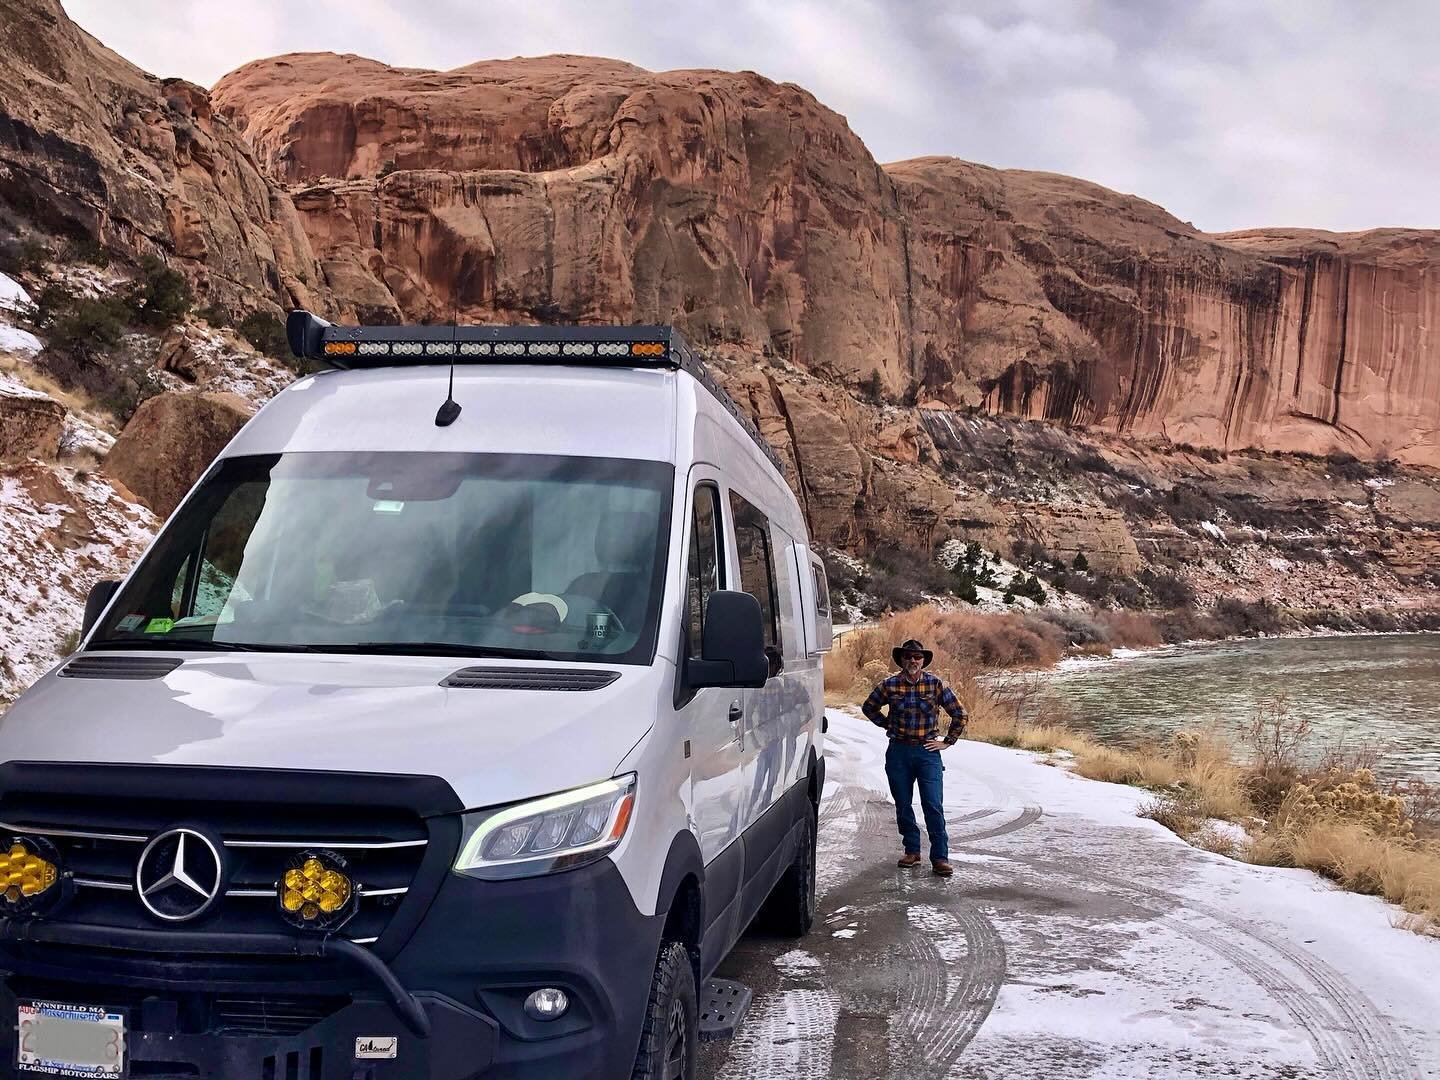 Always adventure ready! Nirvana Upfitters&rsquo; vans redefine on-the-road living. Ready for a taste of van life? 🚐
Contact us today!! 

Thanks to our customers for sharing their adventures on the road! 🙌

 

#vanlife #vanliving #ontheroad #adventu